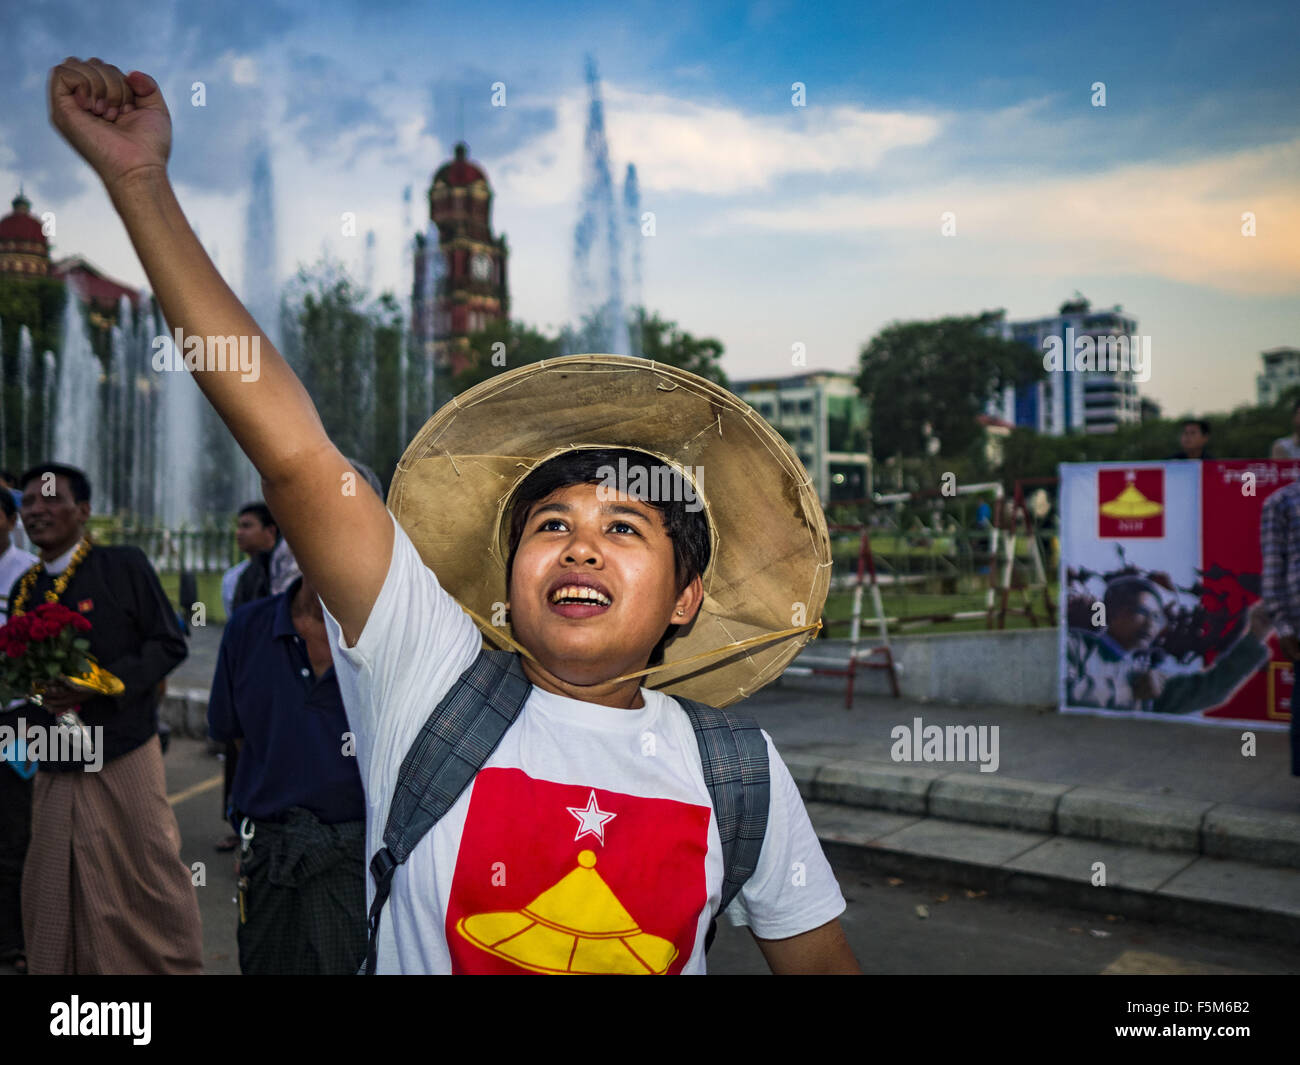 Yangon, Yangon Division, Myanmar. 6th Nov, 2015. NDF supporters cheer at the final NDF election rally of the 2015 election. The rally was held in central Yangon, next to the historic Sule Pagoda and across the street from Yangon city hall. The National Democratic Force (NDF) was formed by former members of the National League for Democracy (NLD) who chose to contest the 2010 general election in Myanmar because the NLD boycotted that election. There have been mass defections from the NFD this year because many of the people who joined the NFD in 2010 have gone back to the NLD, which is contest Stock Photo